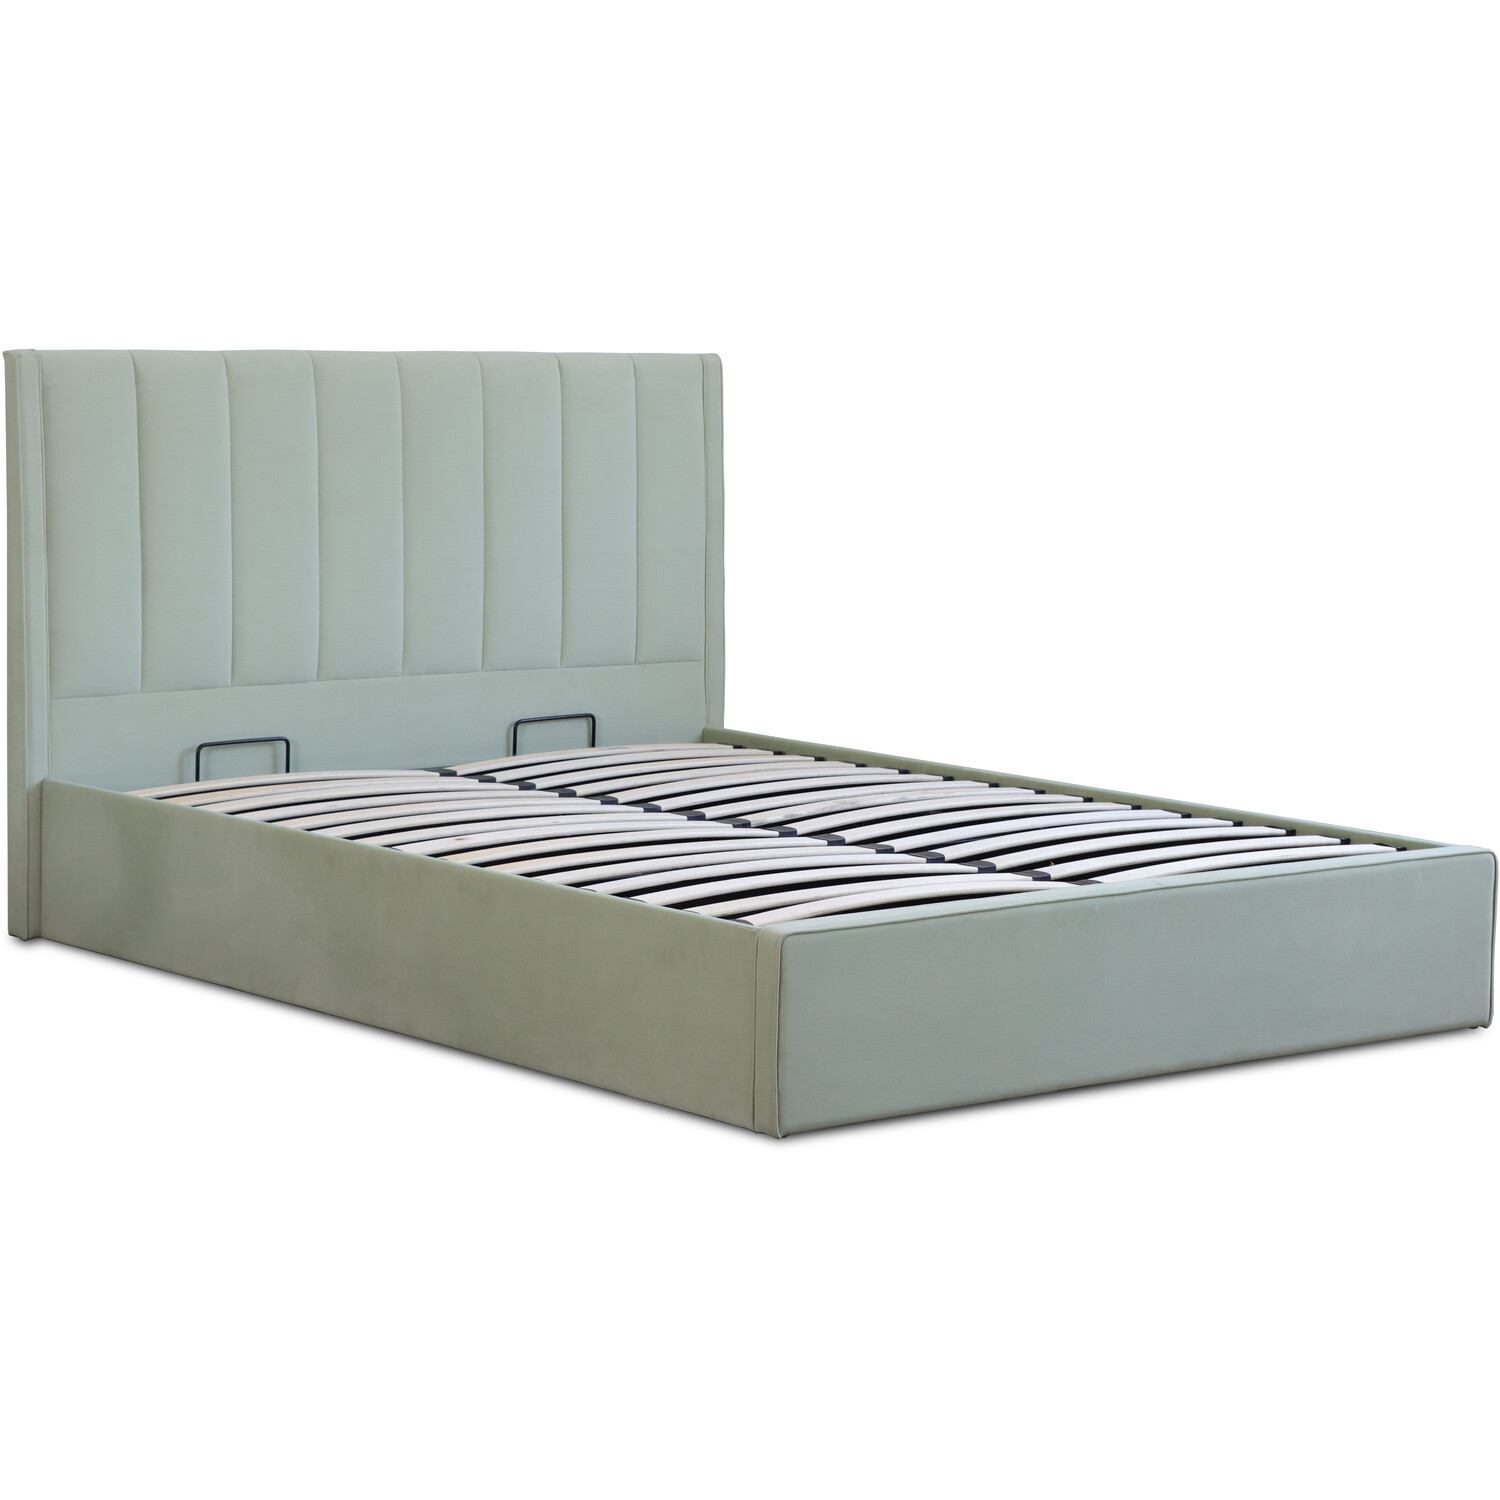 Willow Super King Size Mint Ottoman Bed Image 4